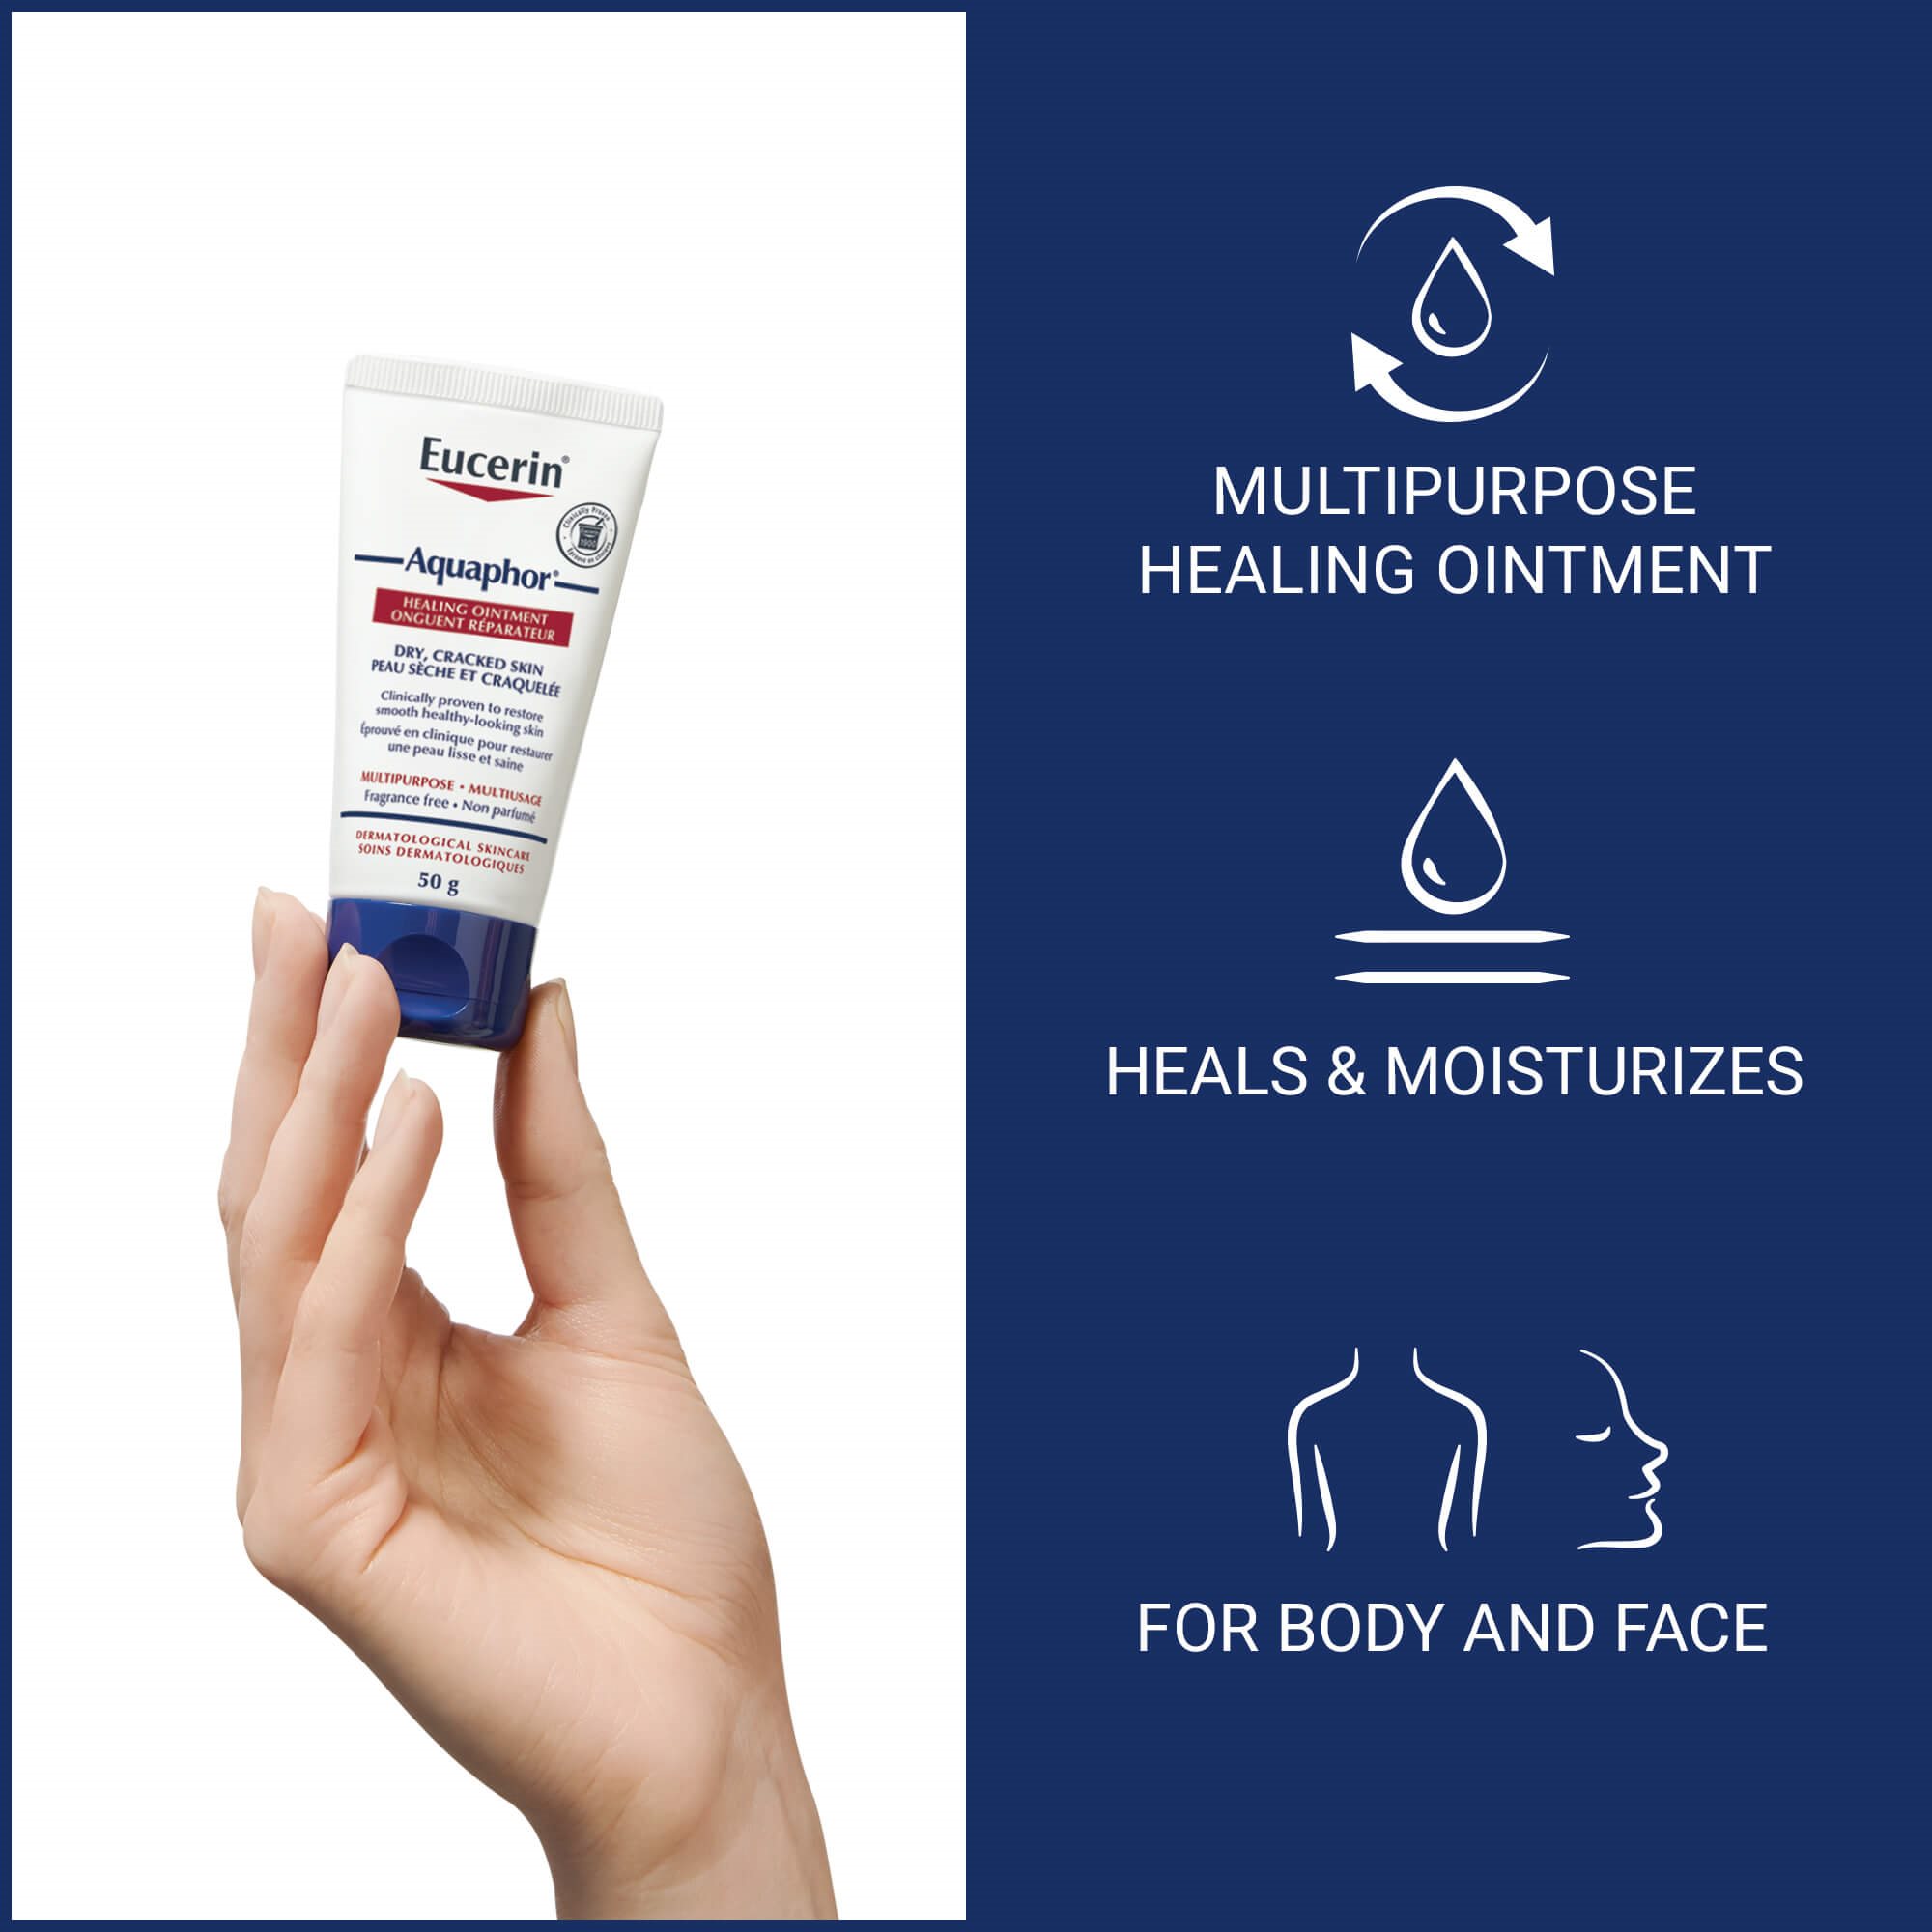 Close up of an Eucerin Aquaphor 50g tube being held up by a hand with product benefits and uses listed on the side